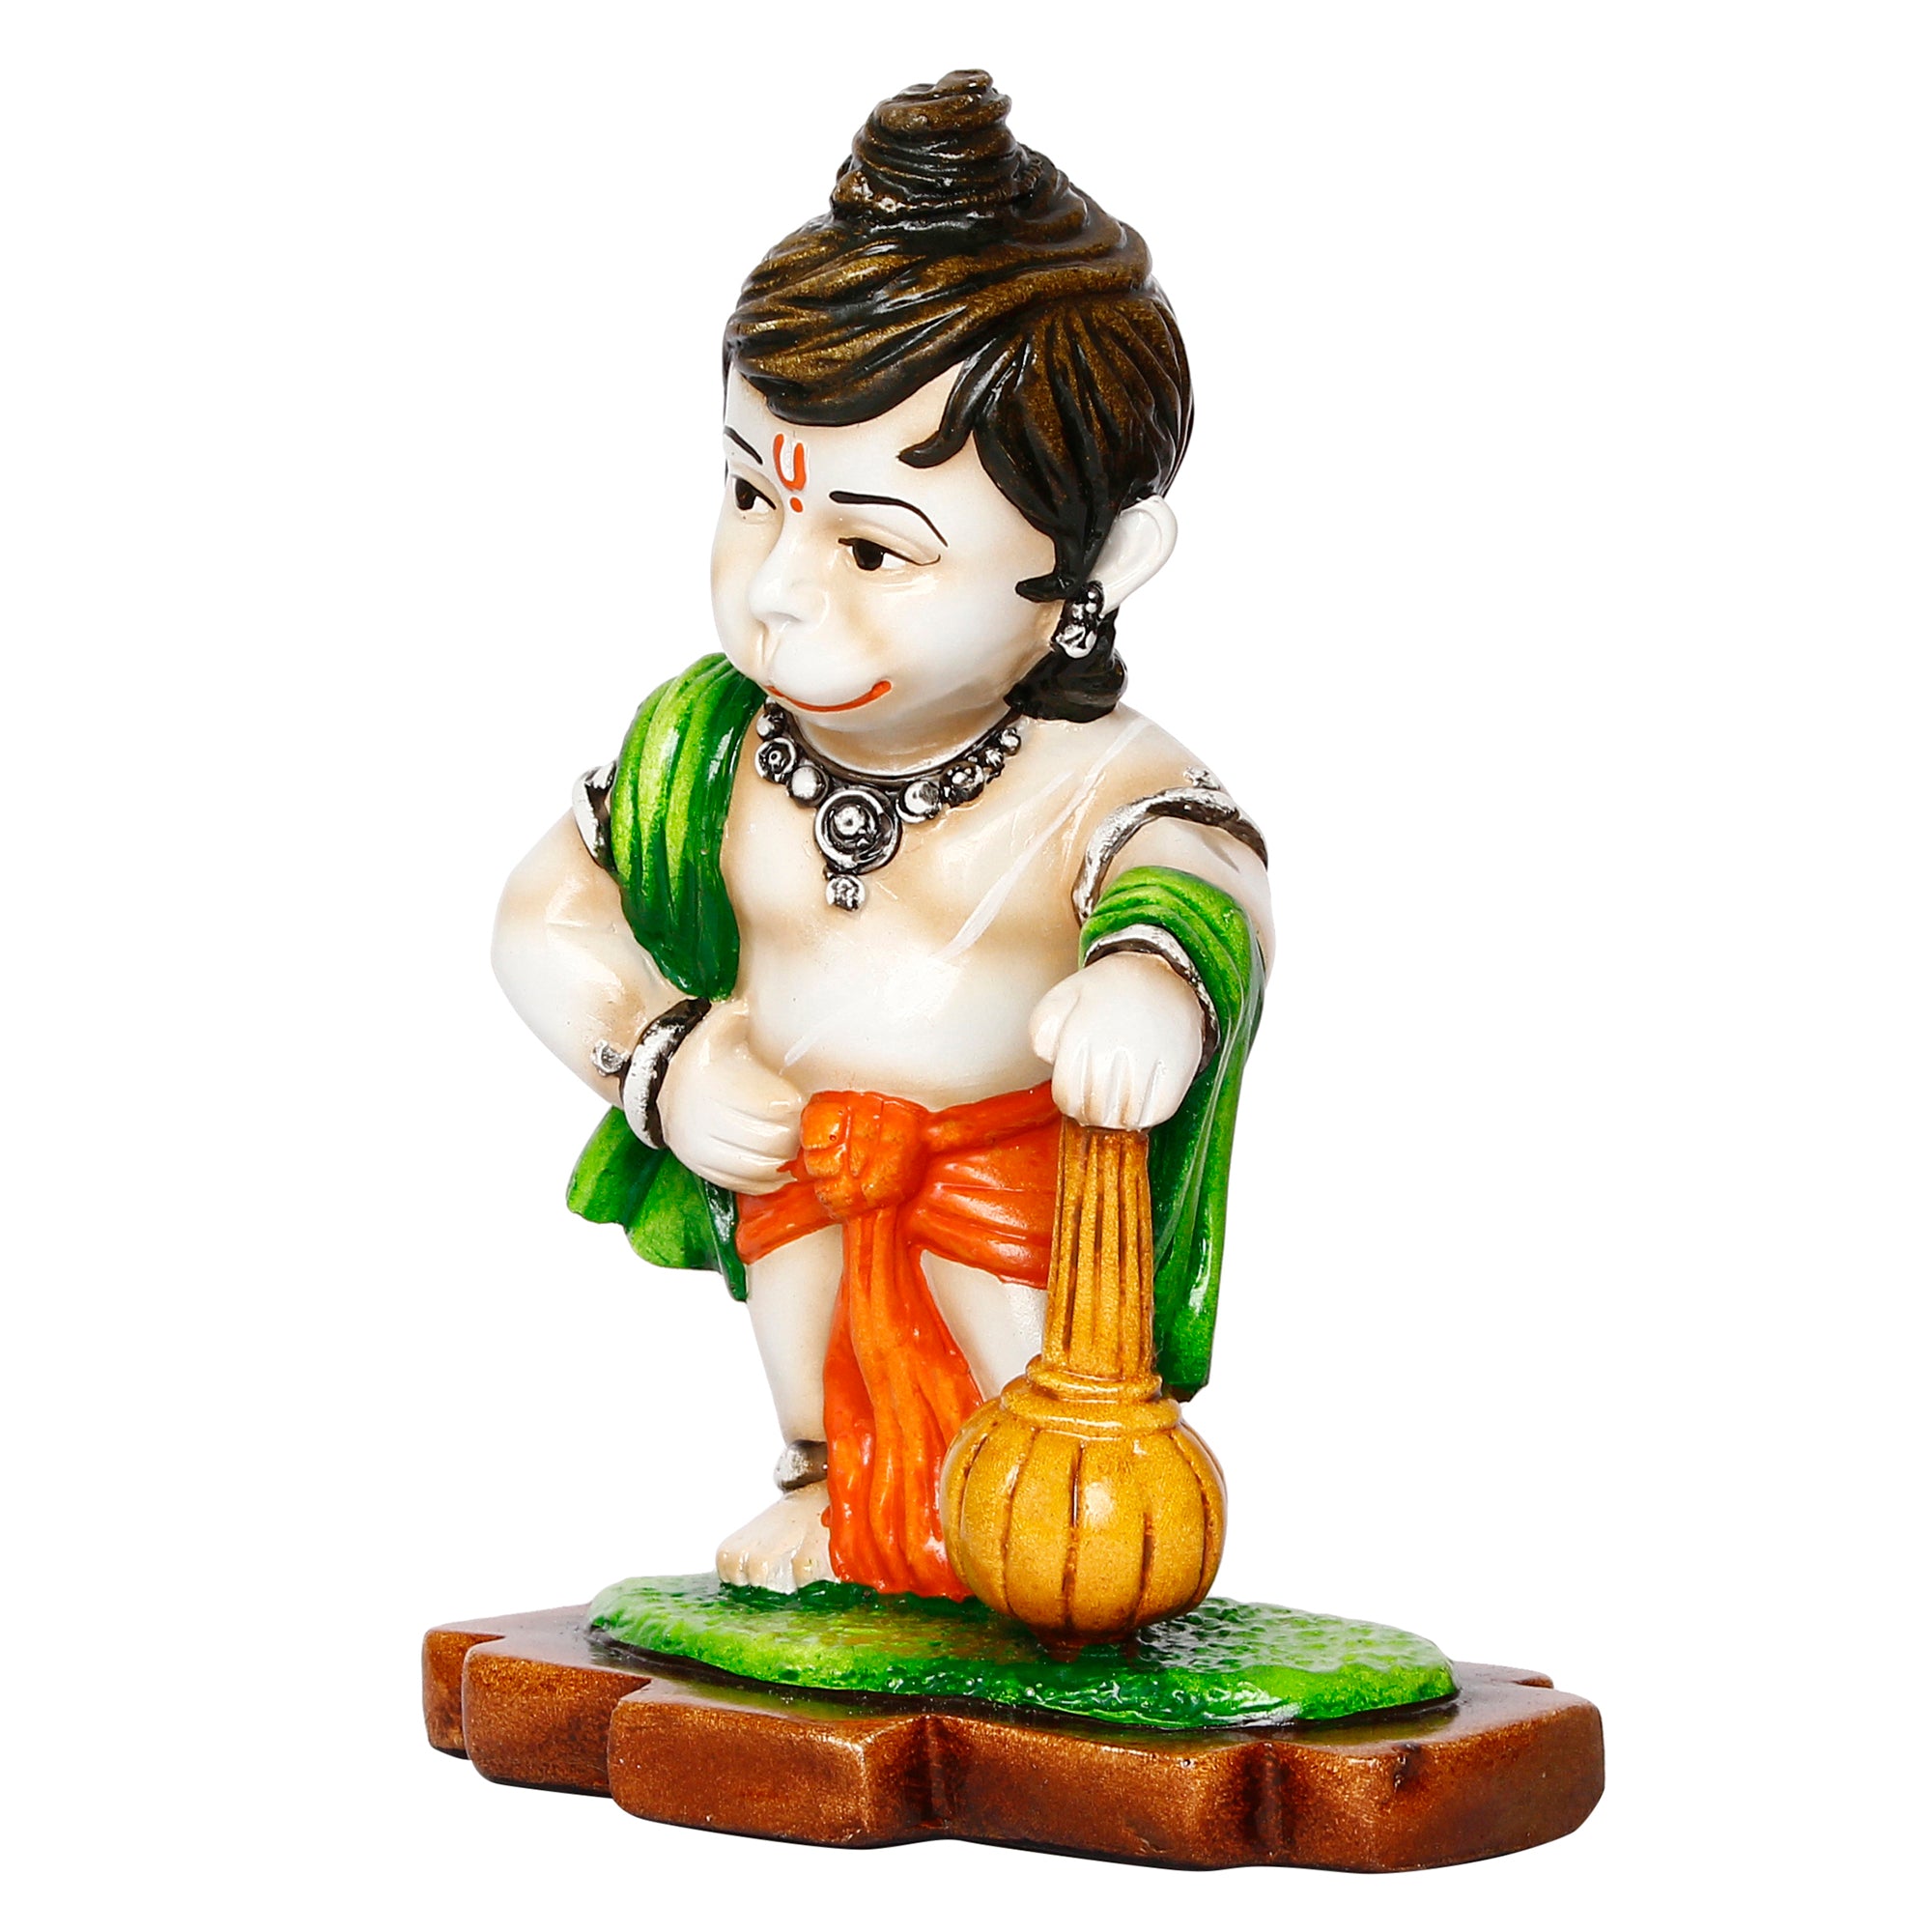 Colorful Standing Lord Hanuman Statue With Gada/Mace Handcrafted Polyresin Religious Idol 5